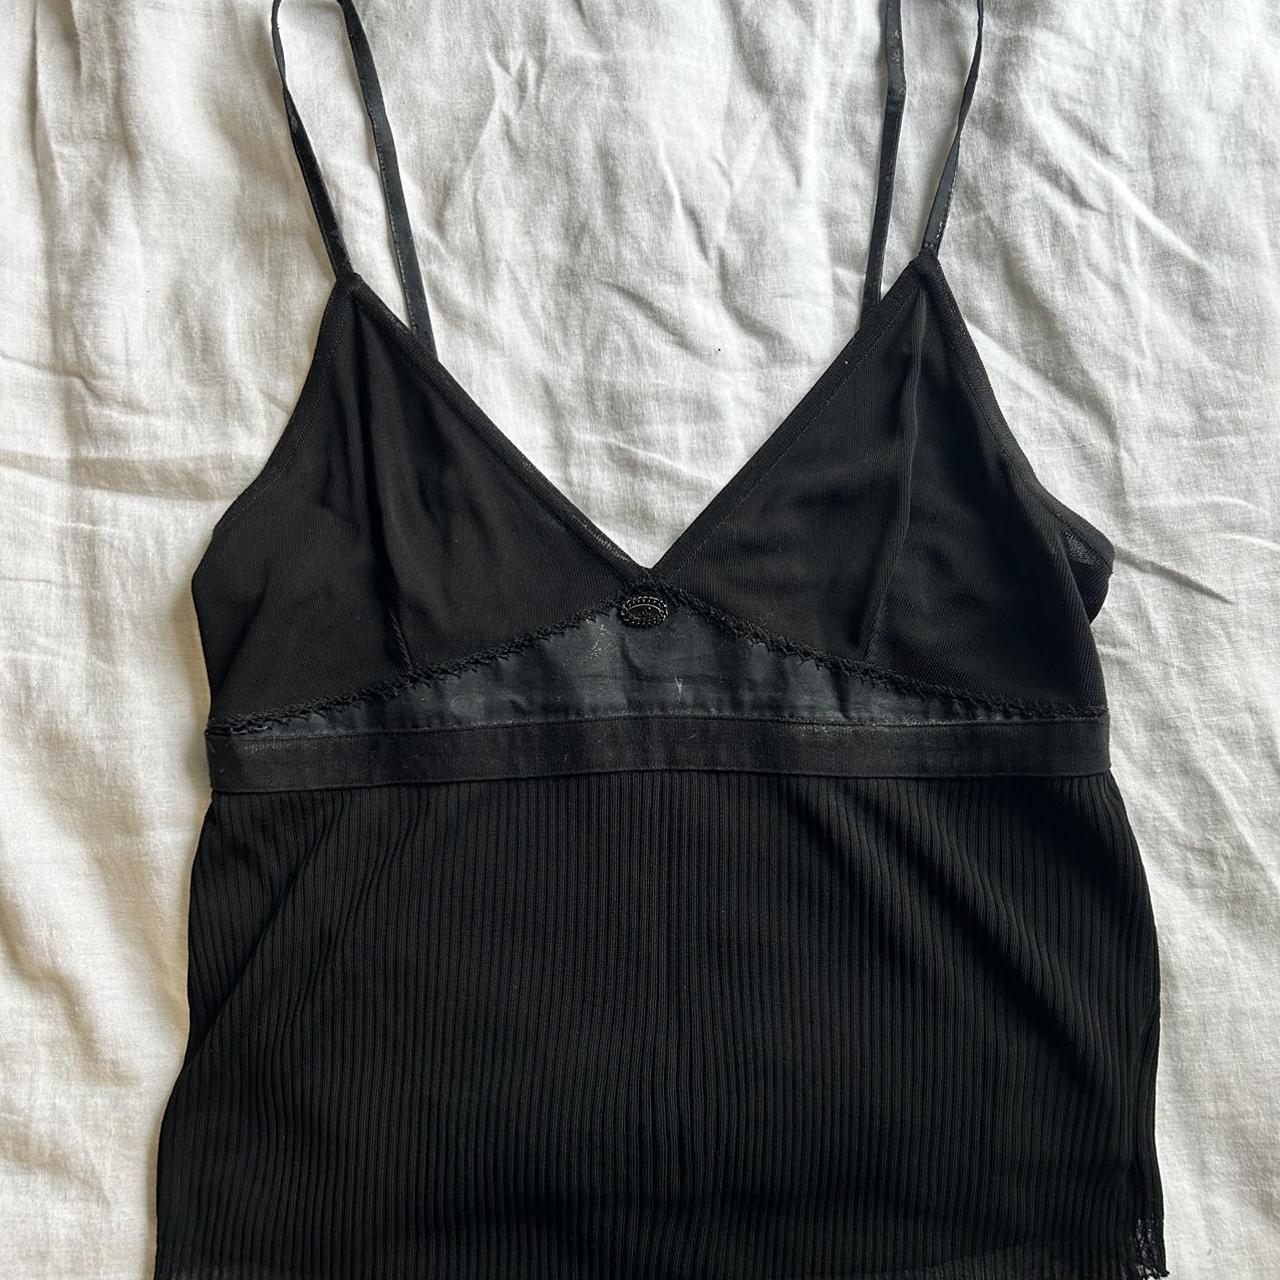 RARE Chanel tank top. Really elegant and comfy. A... - Depop